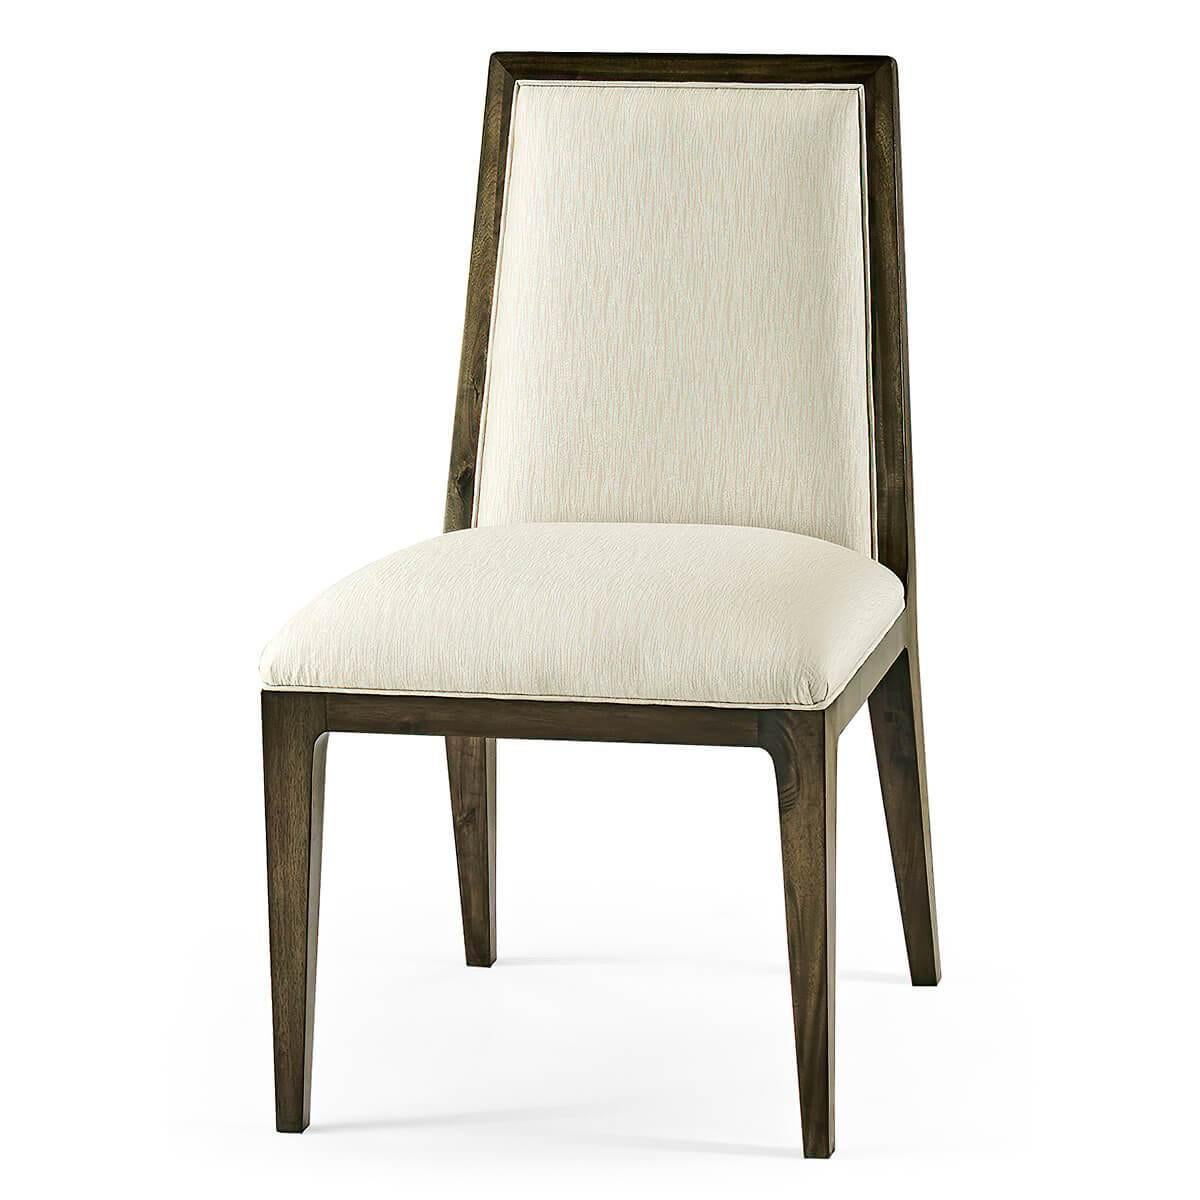 Vietnamese Mid-Century Modern Style Dining Chair For Sale